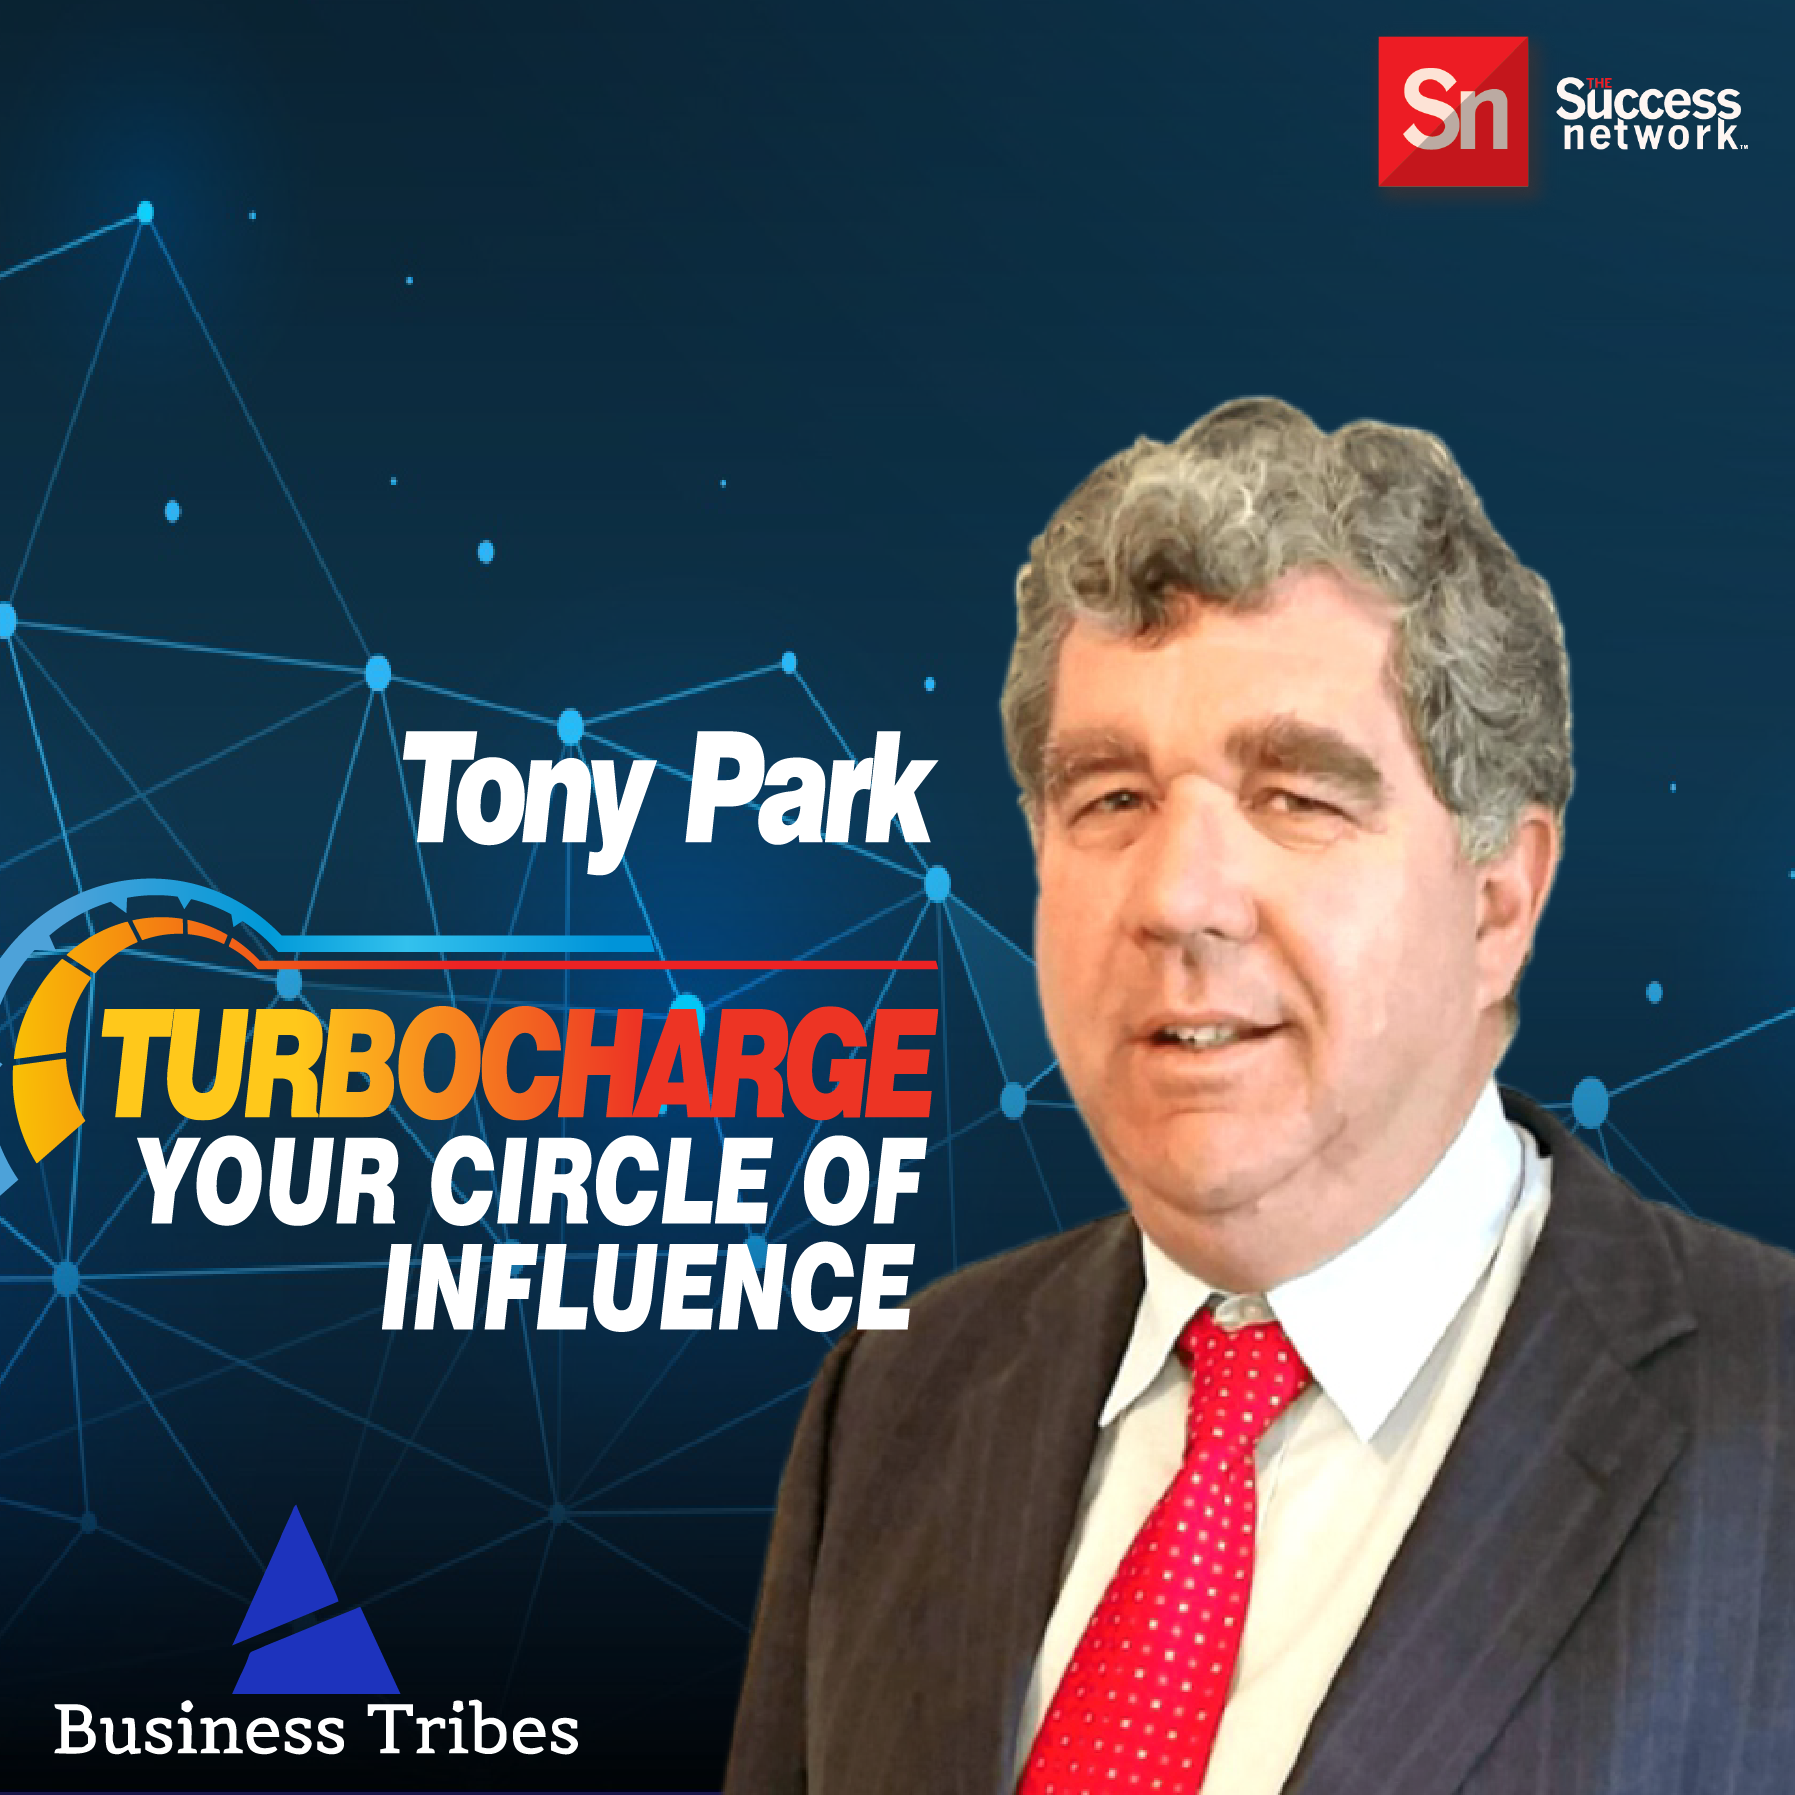 Business Tribes: Turbocharge Your Circle of Influence